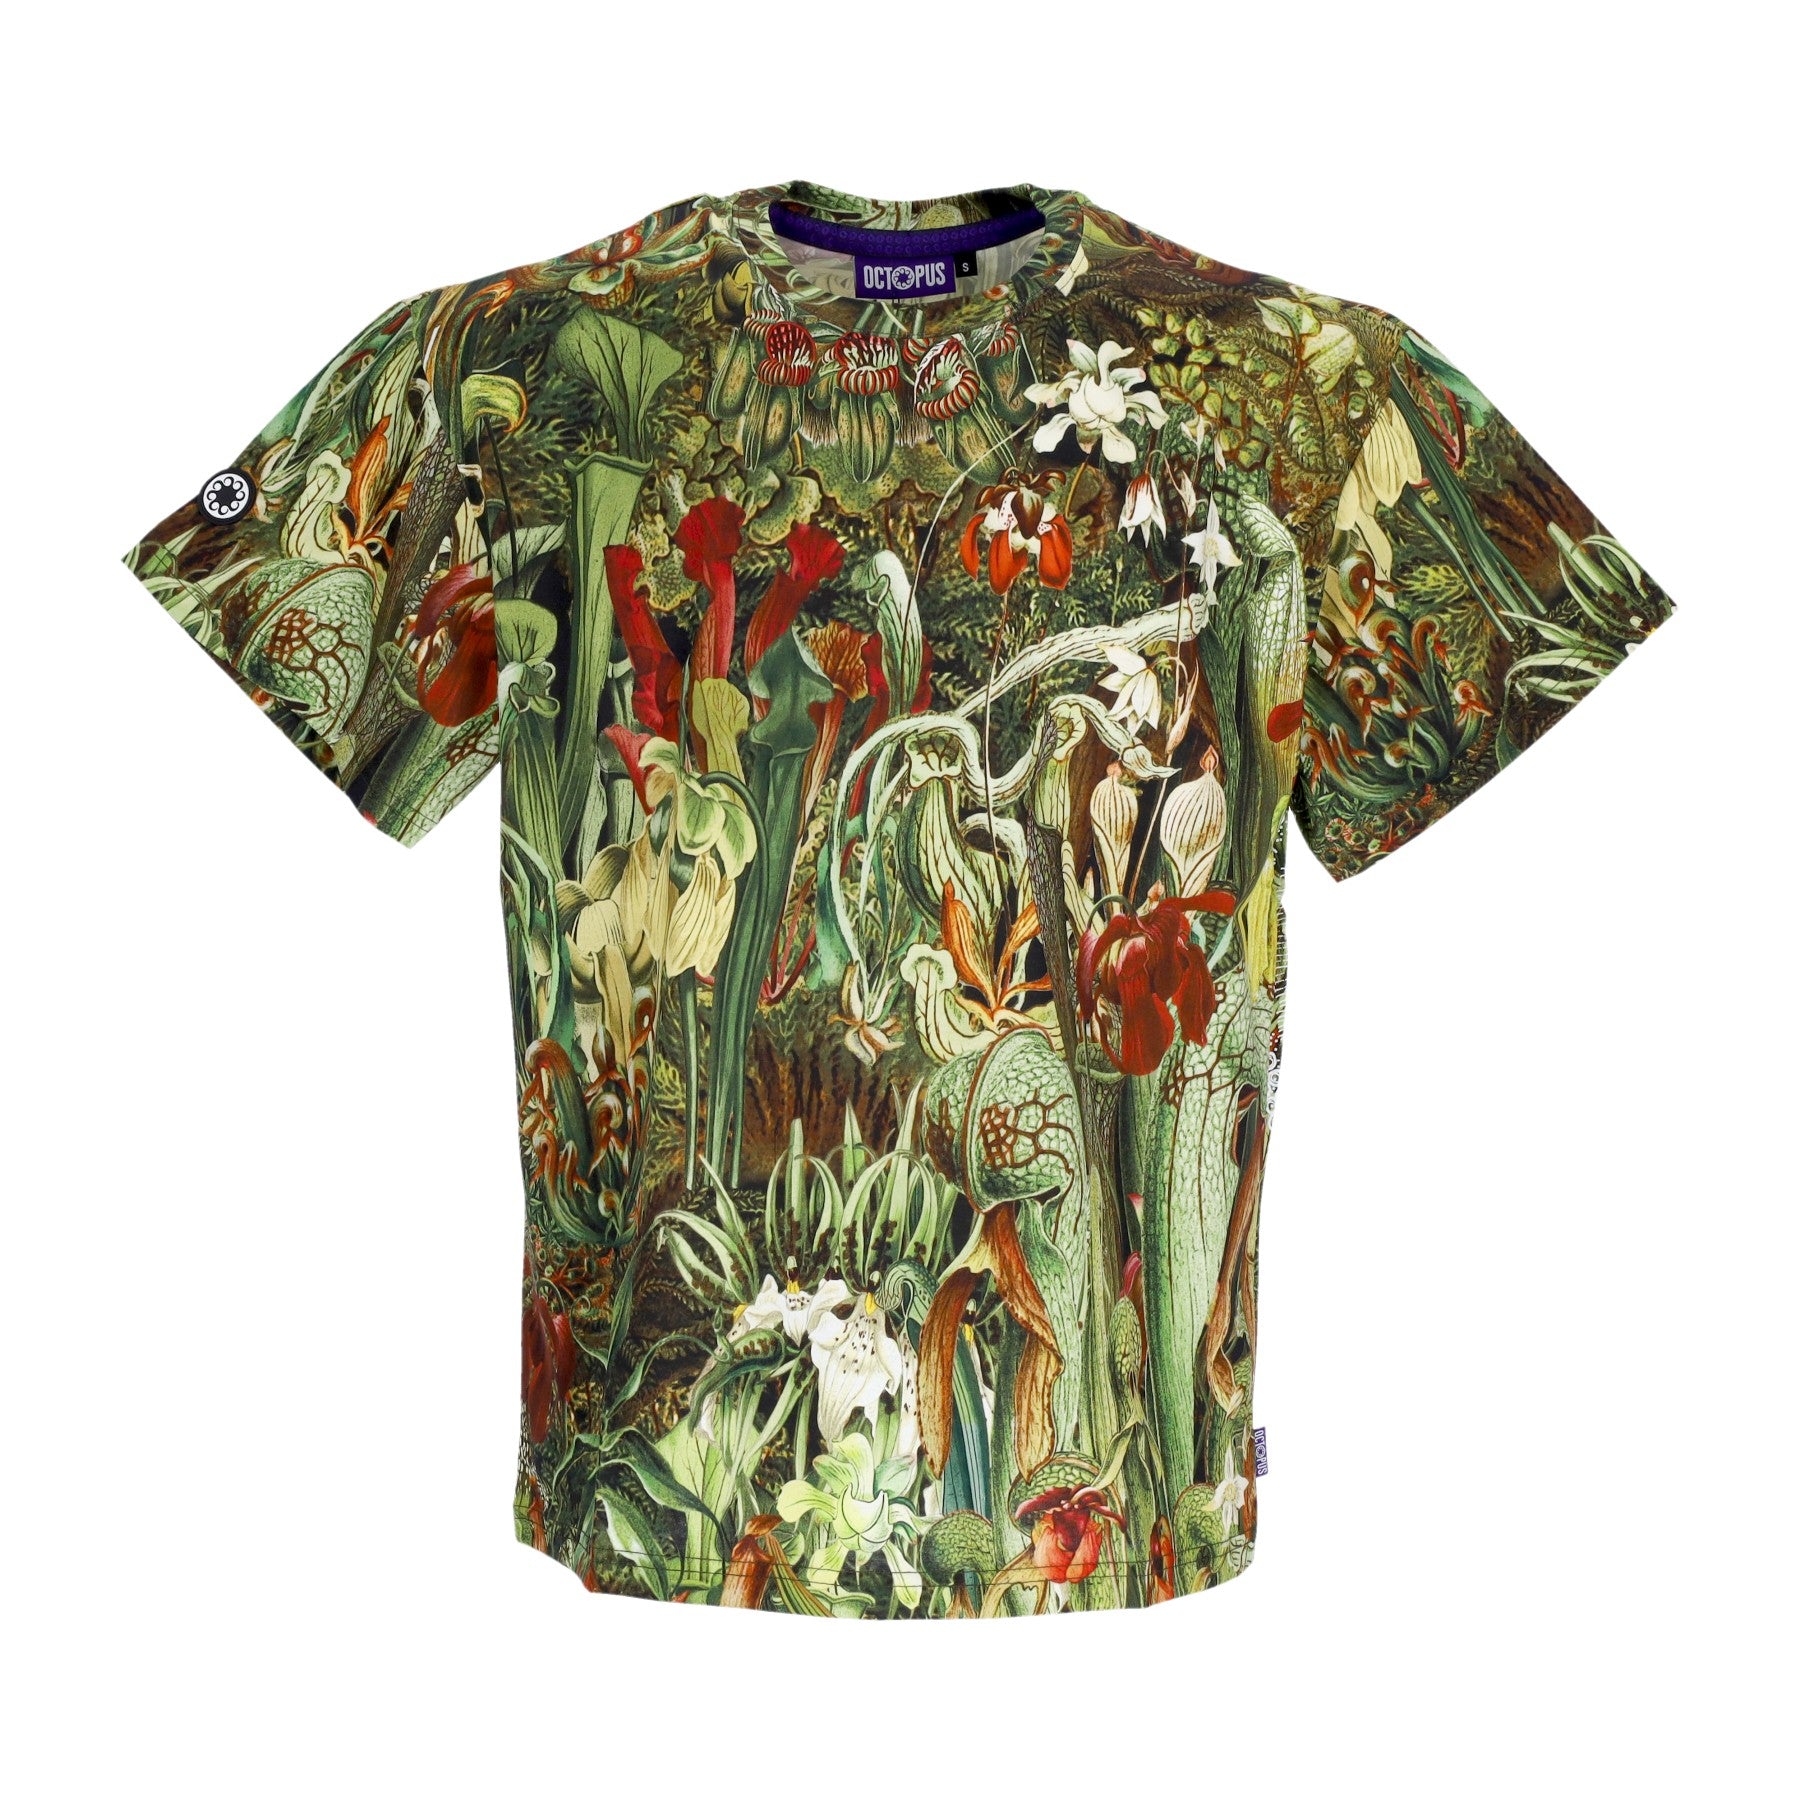 Nepenthes Tee Army Men's T-Shirt